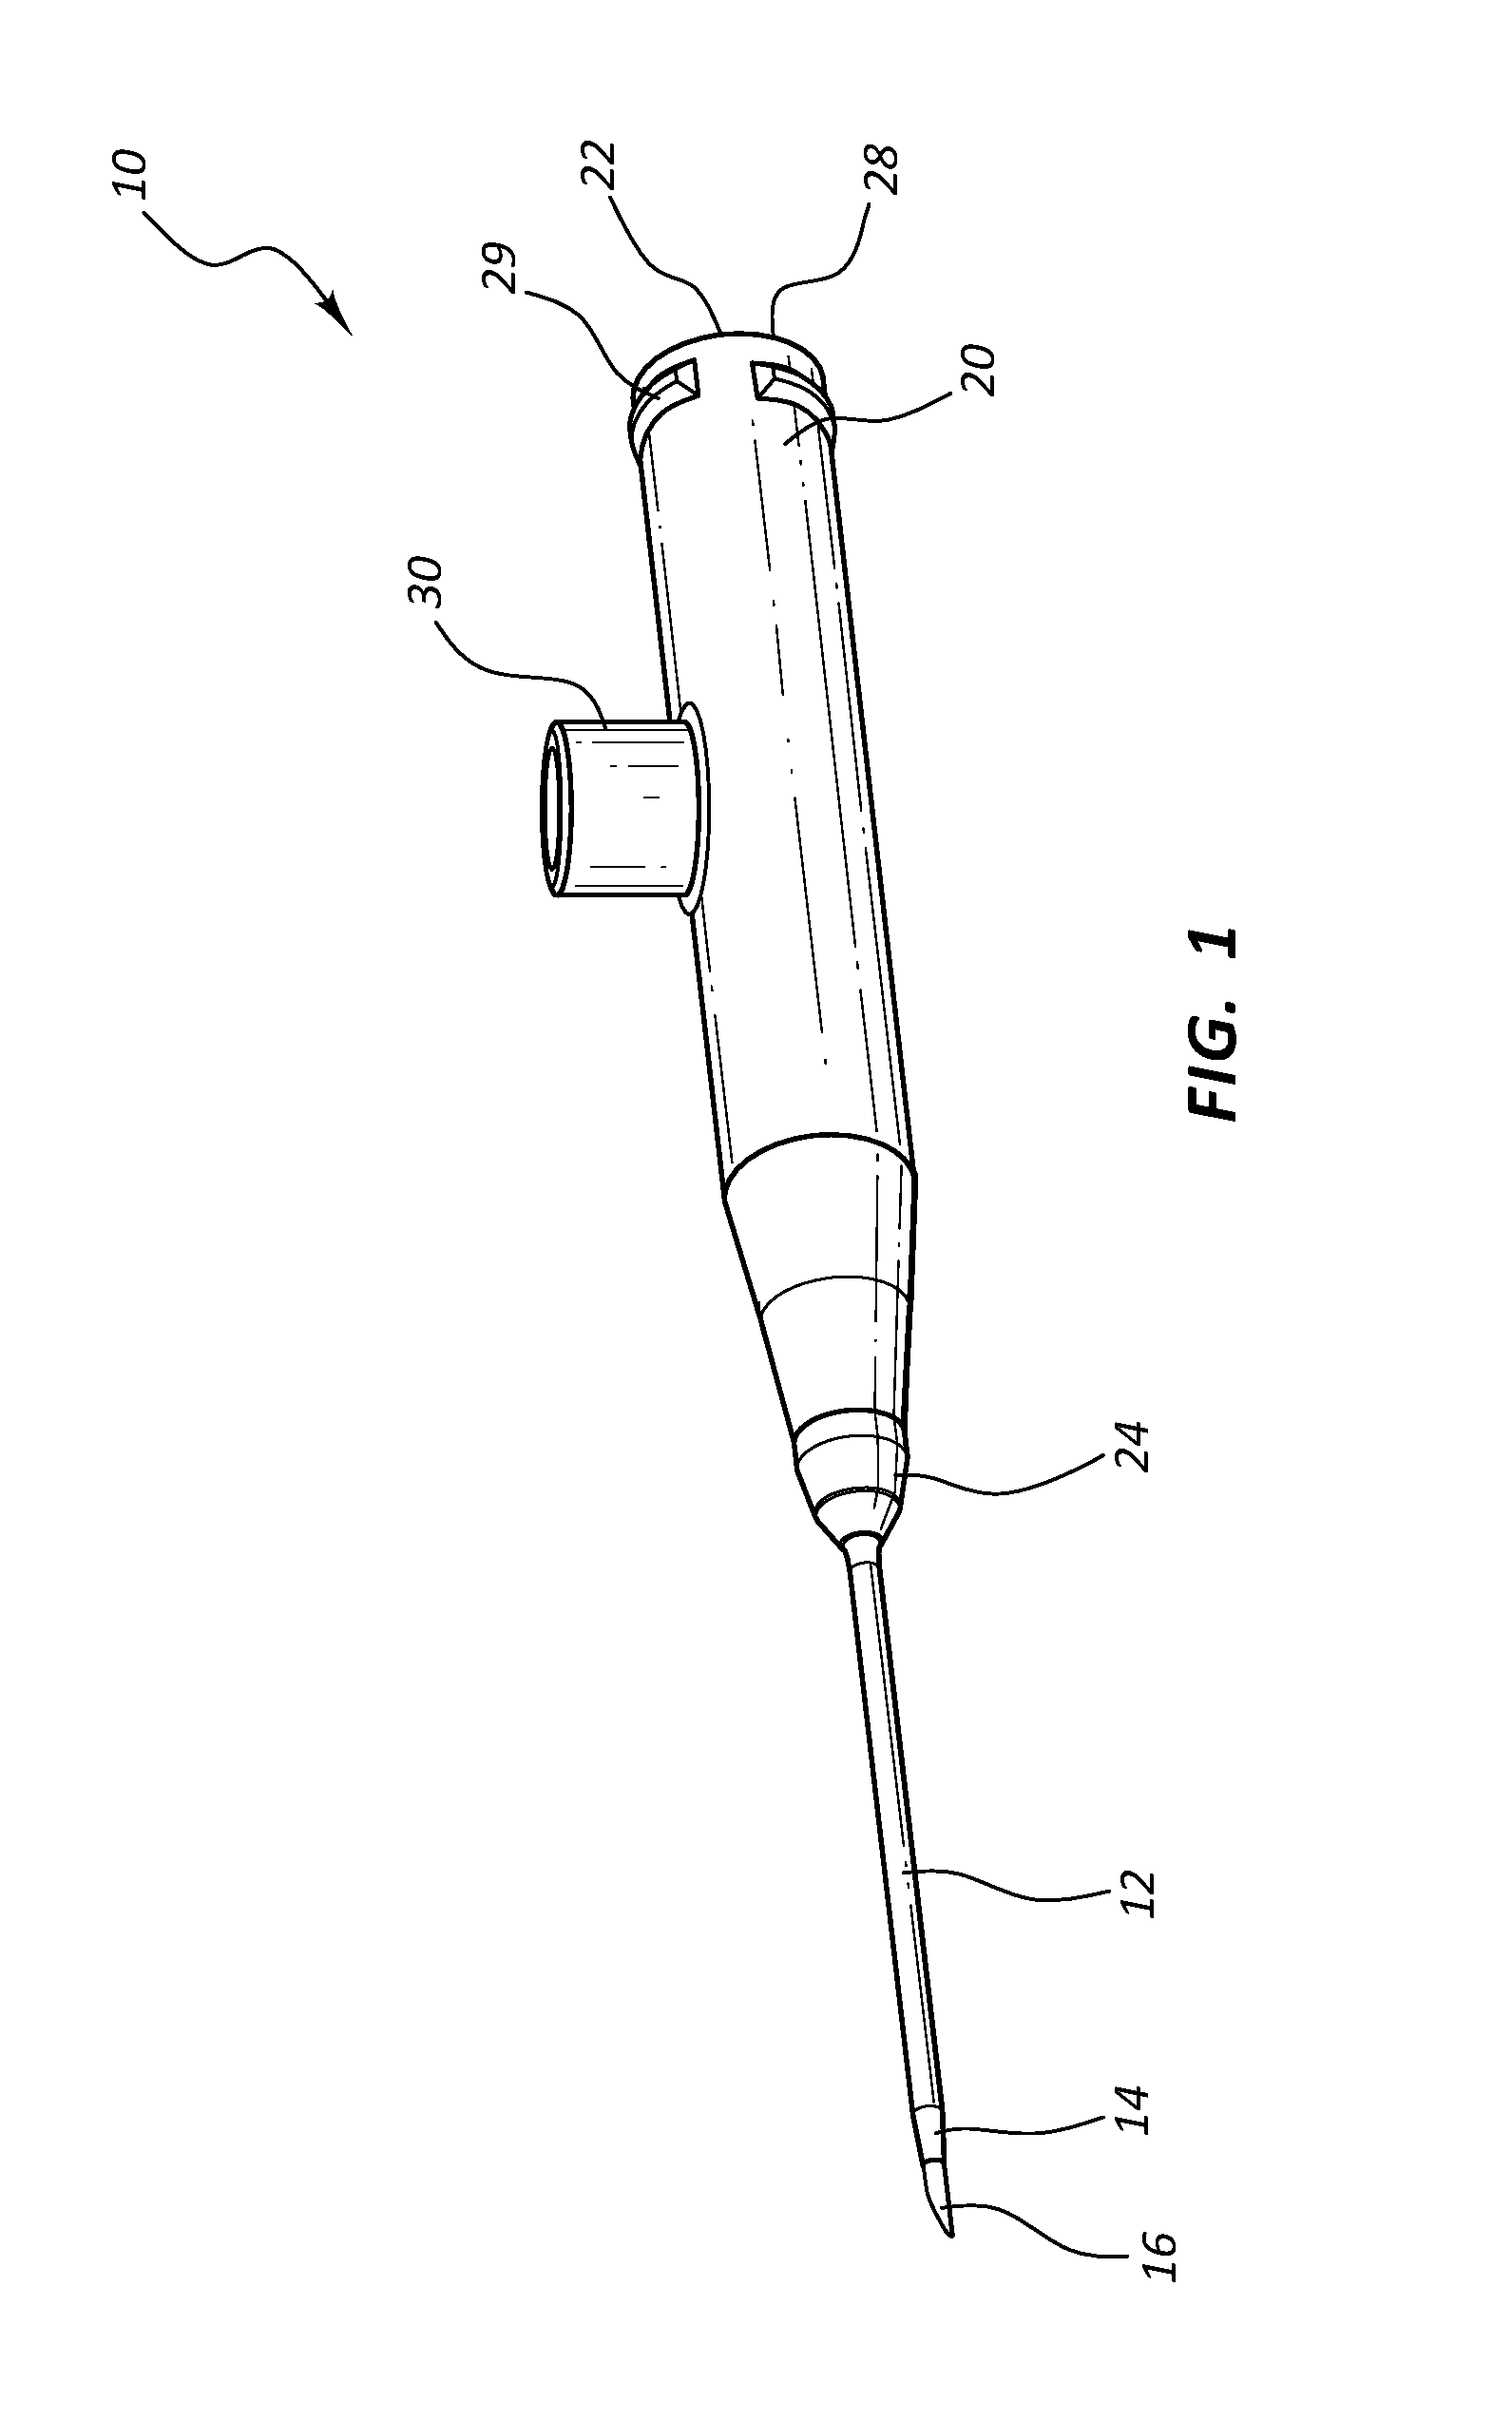 Ported catheter adapter having combined port and blood control valve with venting